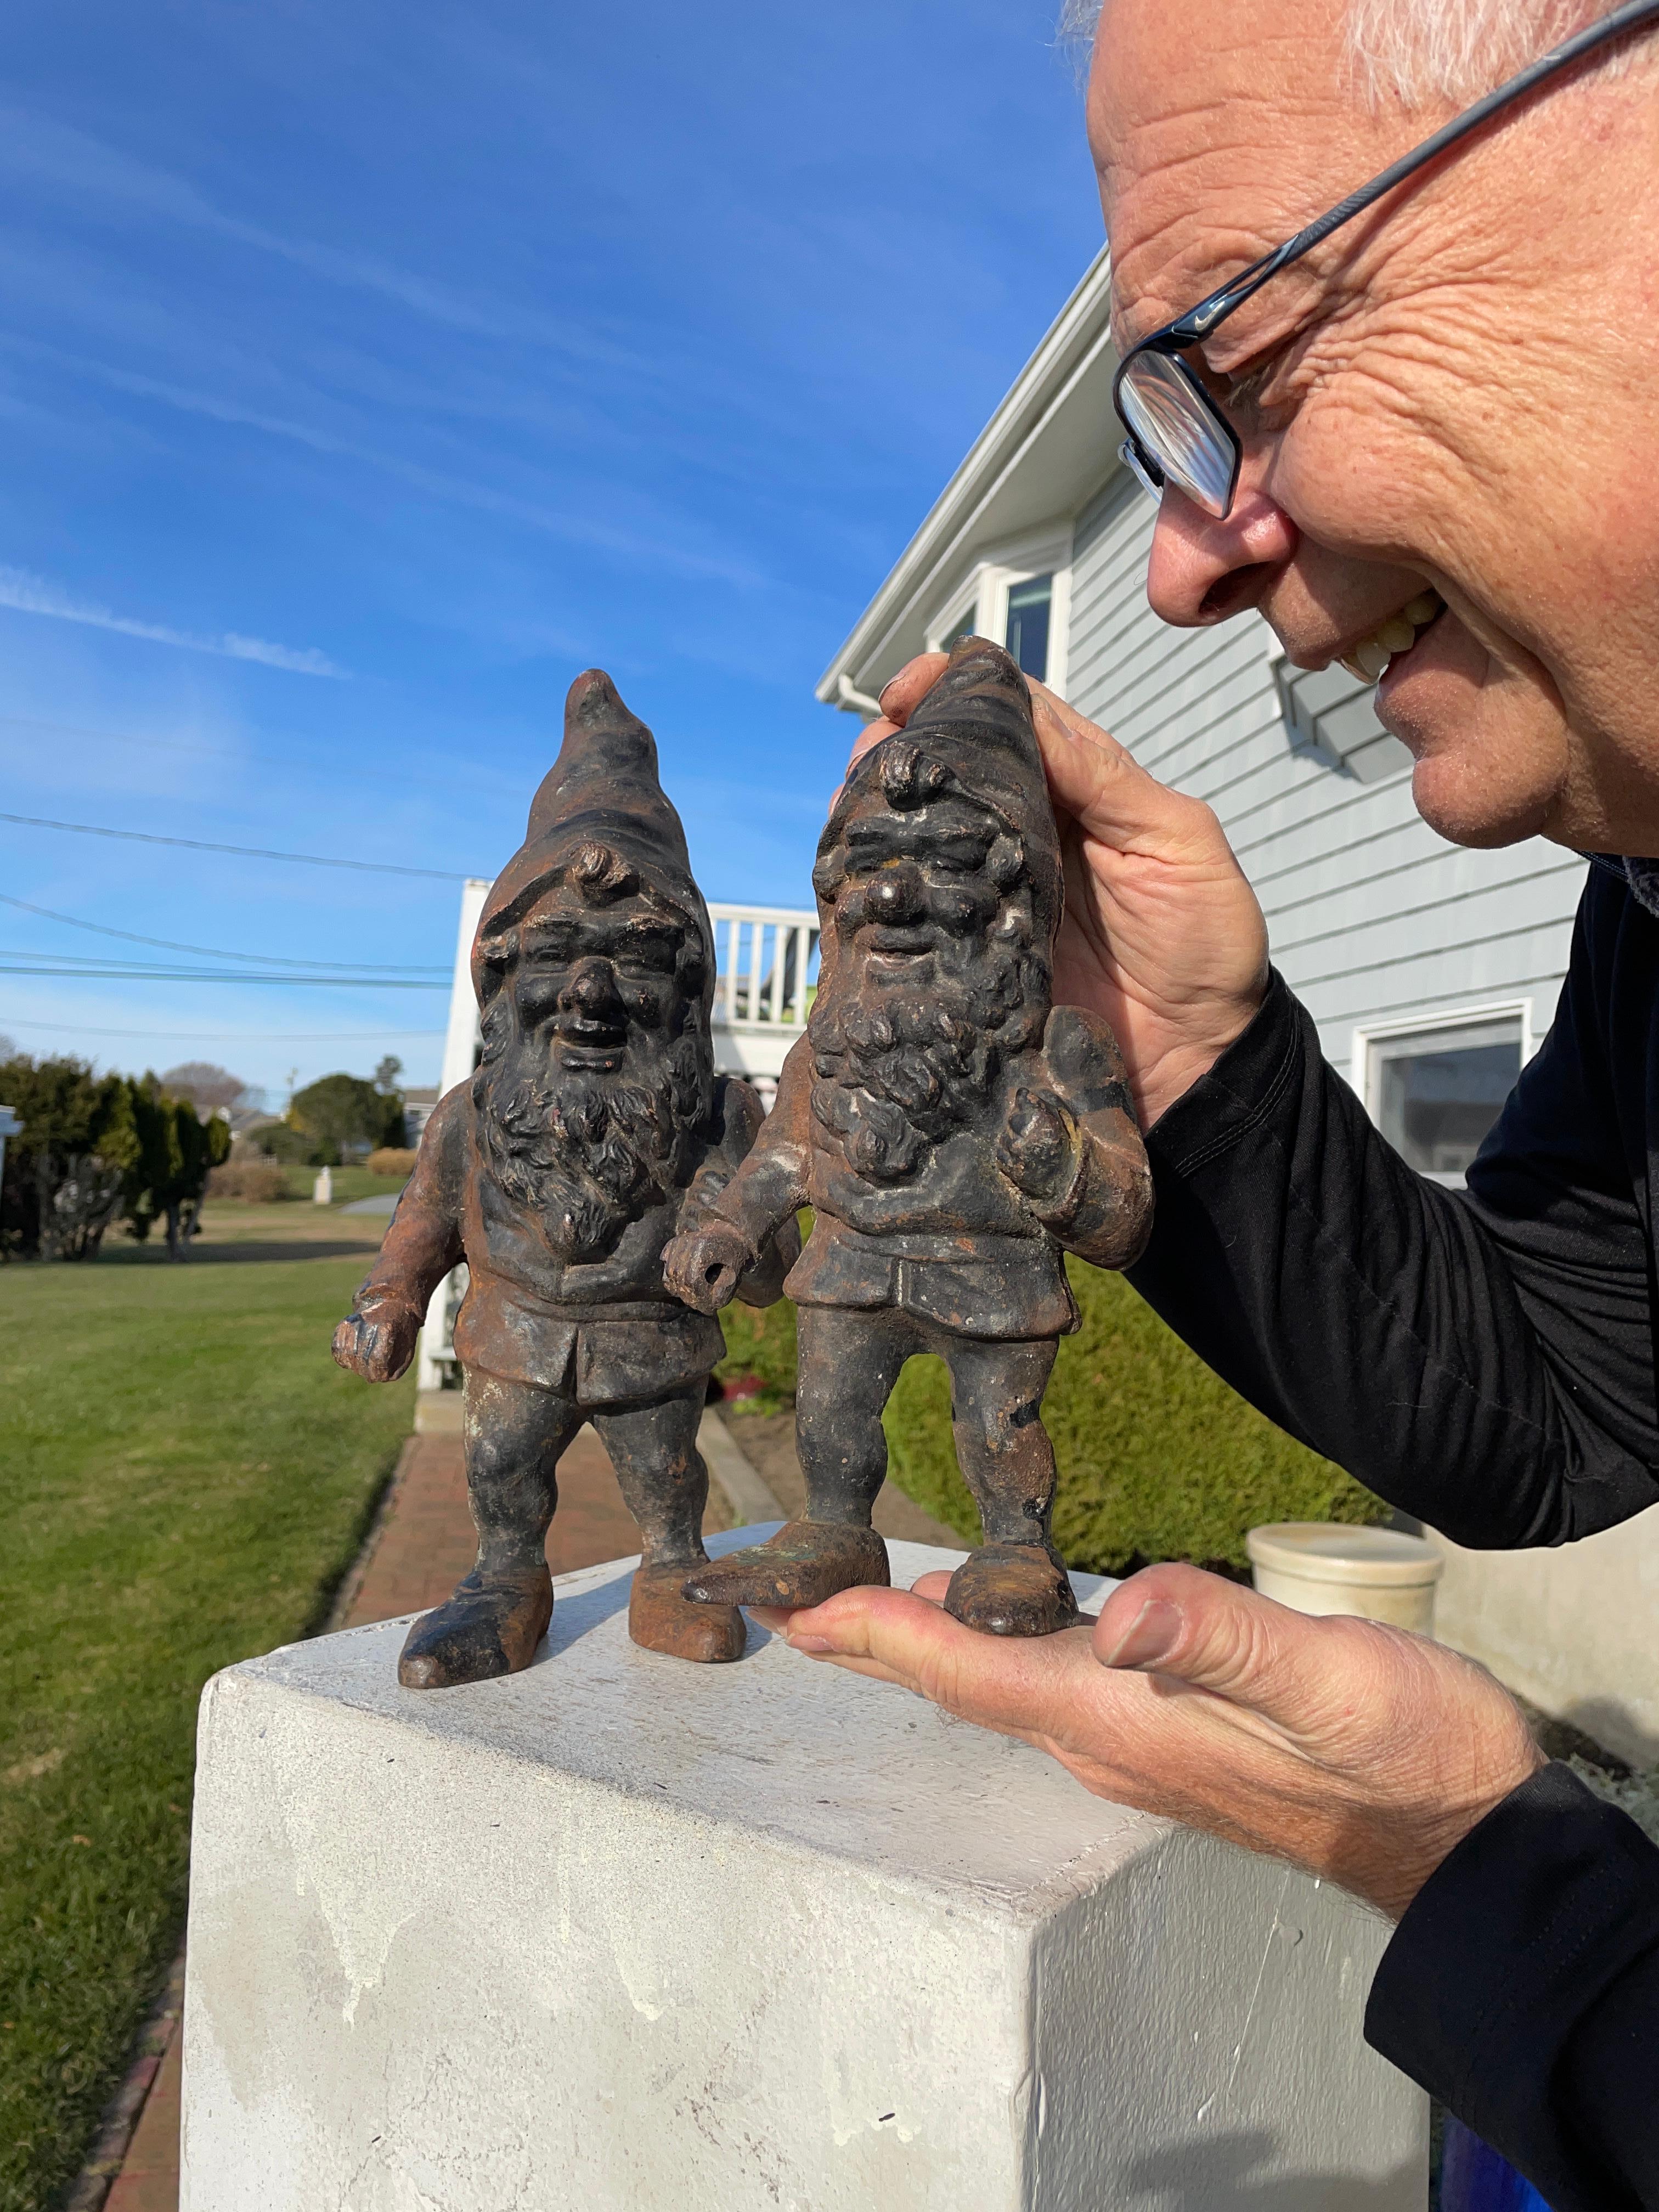 Nostalgic opportunity- a time for joy

America's friendly gnomes- a rare pair (2) of Happy Garden Legends 

Since the early part of the 20th century, American gardeners have been infatuated with these loveable garden gnomes.
No wonder why, as